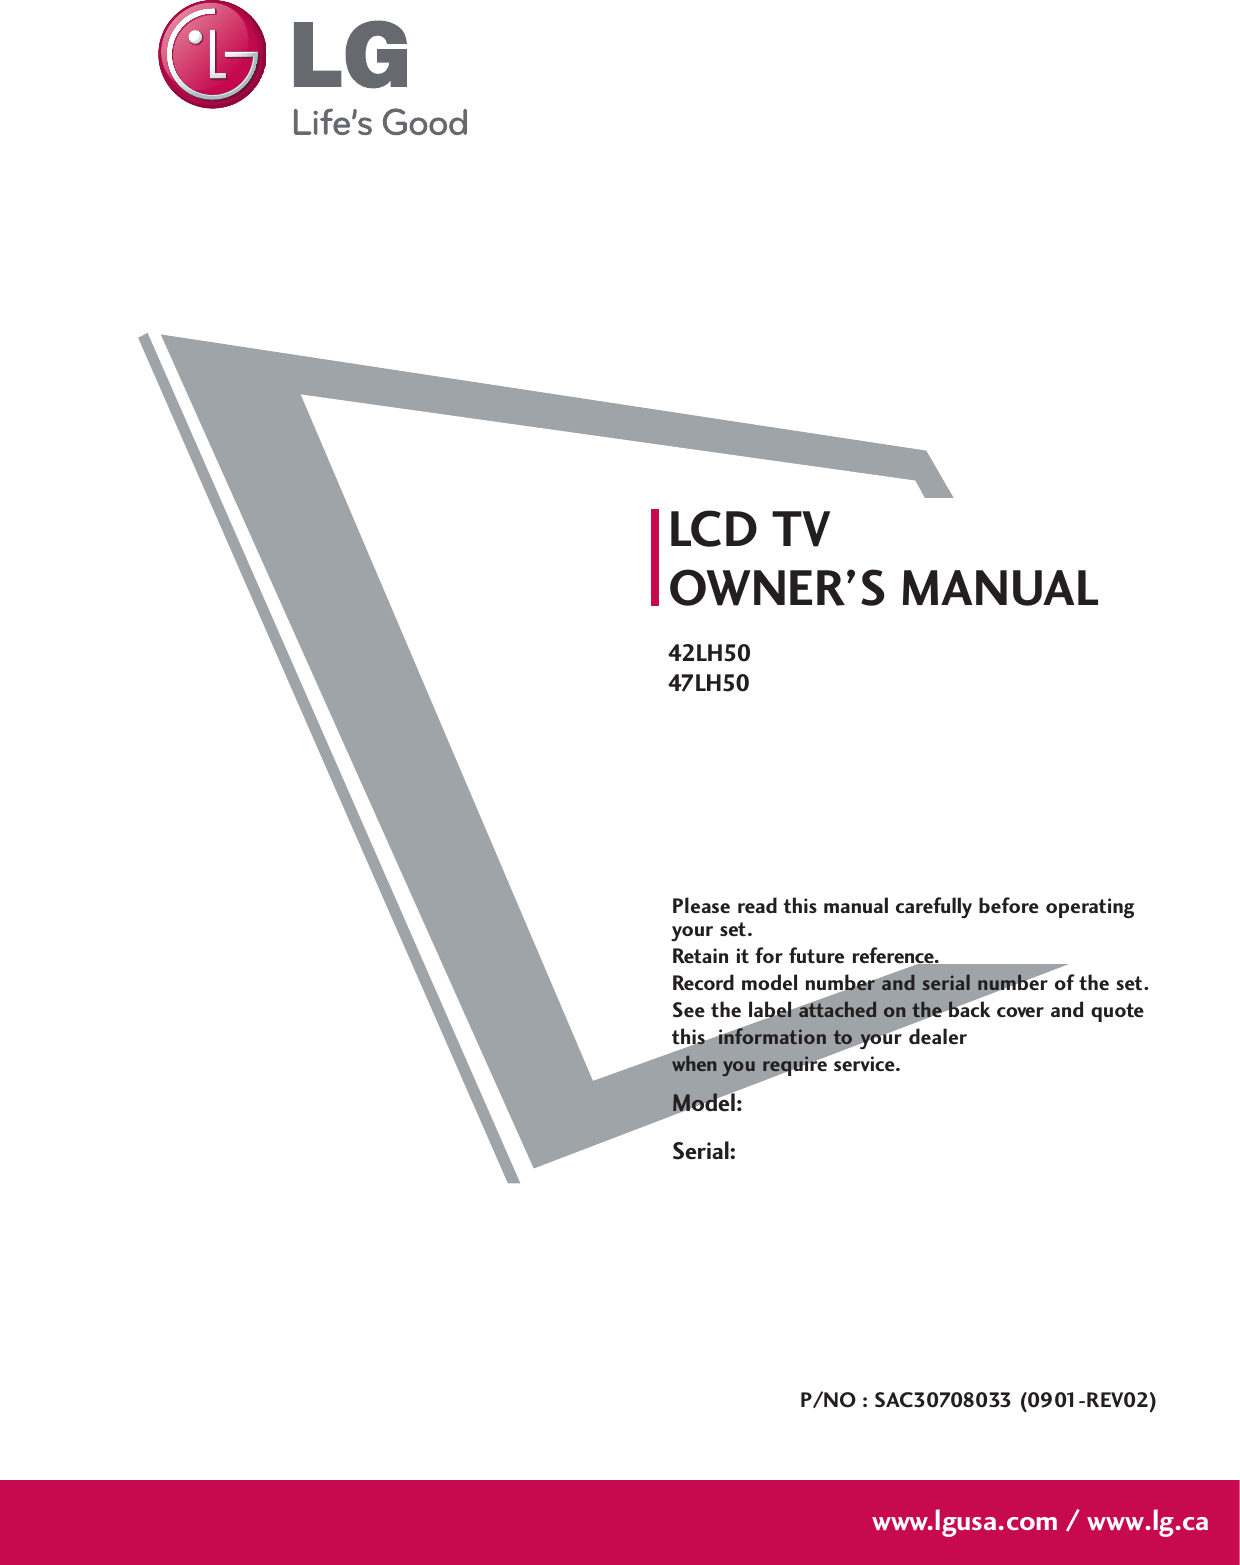 Please read this manual carefully before operatingyour set. Retain it for future reference.Record model number and serial number of the set. See the label attached on the back cover and quote this  information to your dealer when you require service.LCD TVOWNER’S MANUAL42LH5047LH50P/NO : SAC30708033 (0901-REV02)www.lgusa.com / www.lg.caModel:Serial: